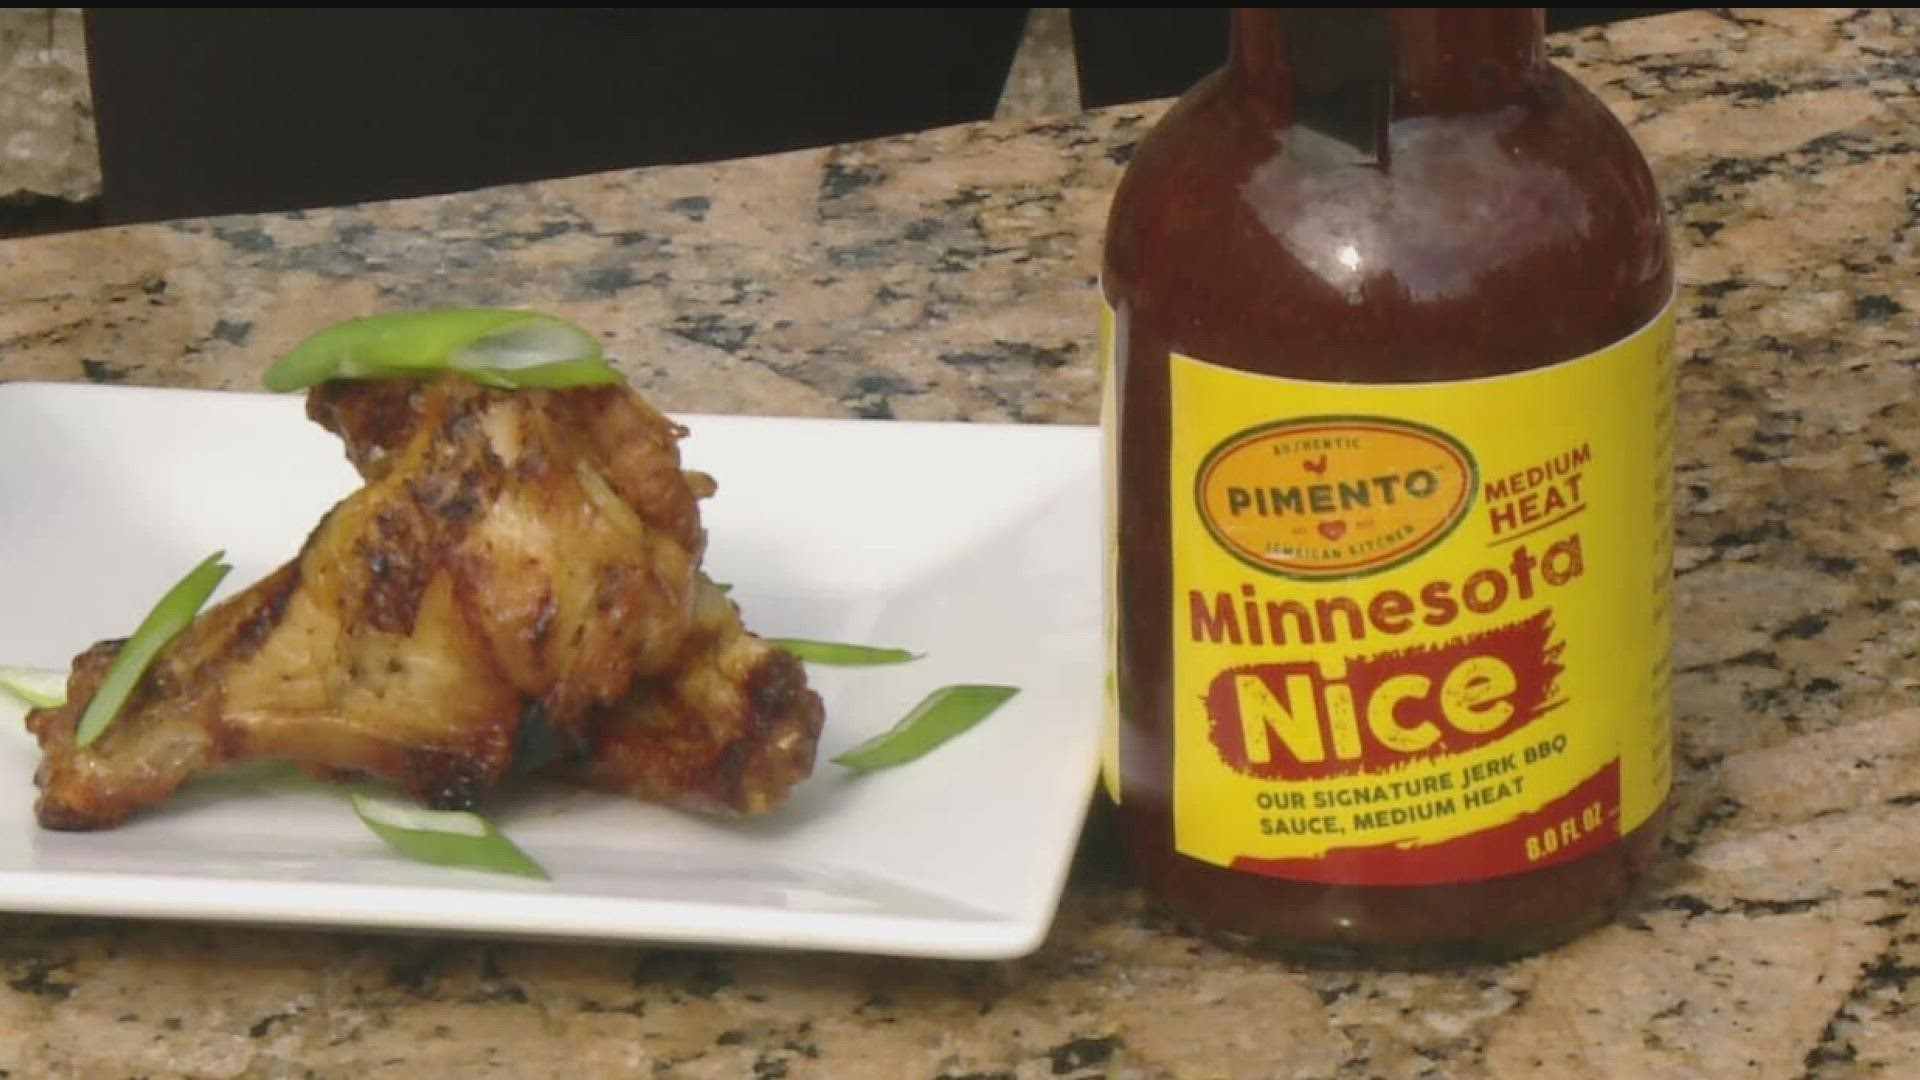 During KARE 11 Saturday, the restaurant demonstrated how to use their "MN Nice" and "Kill Dem Wid It" sauces on wings.